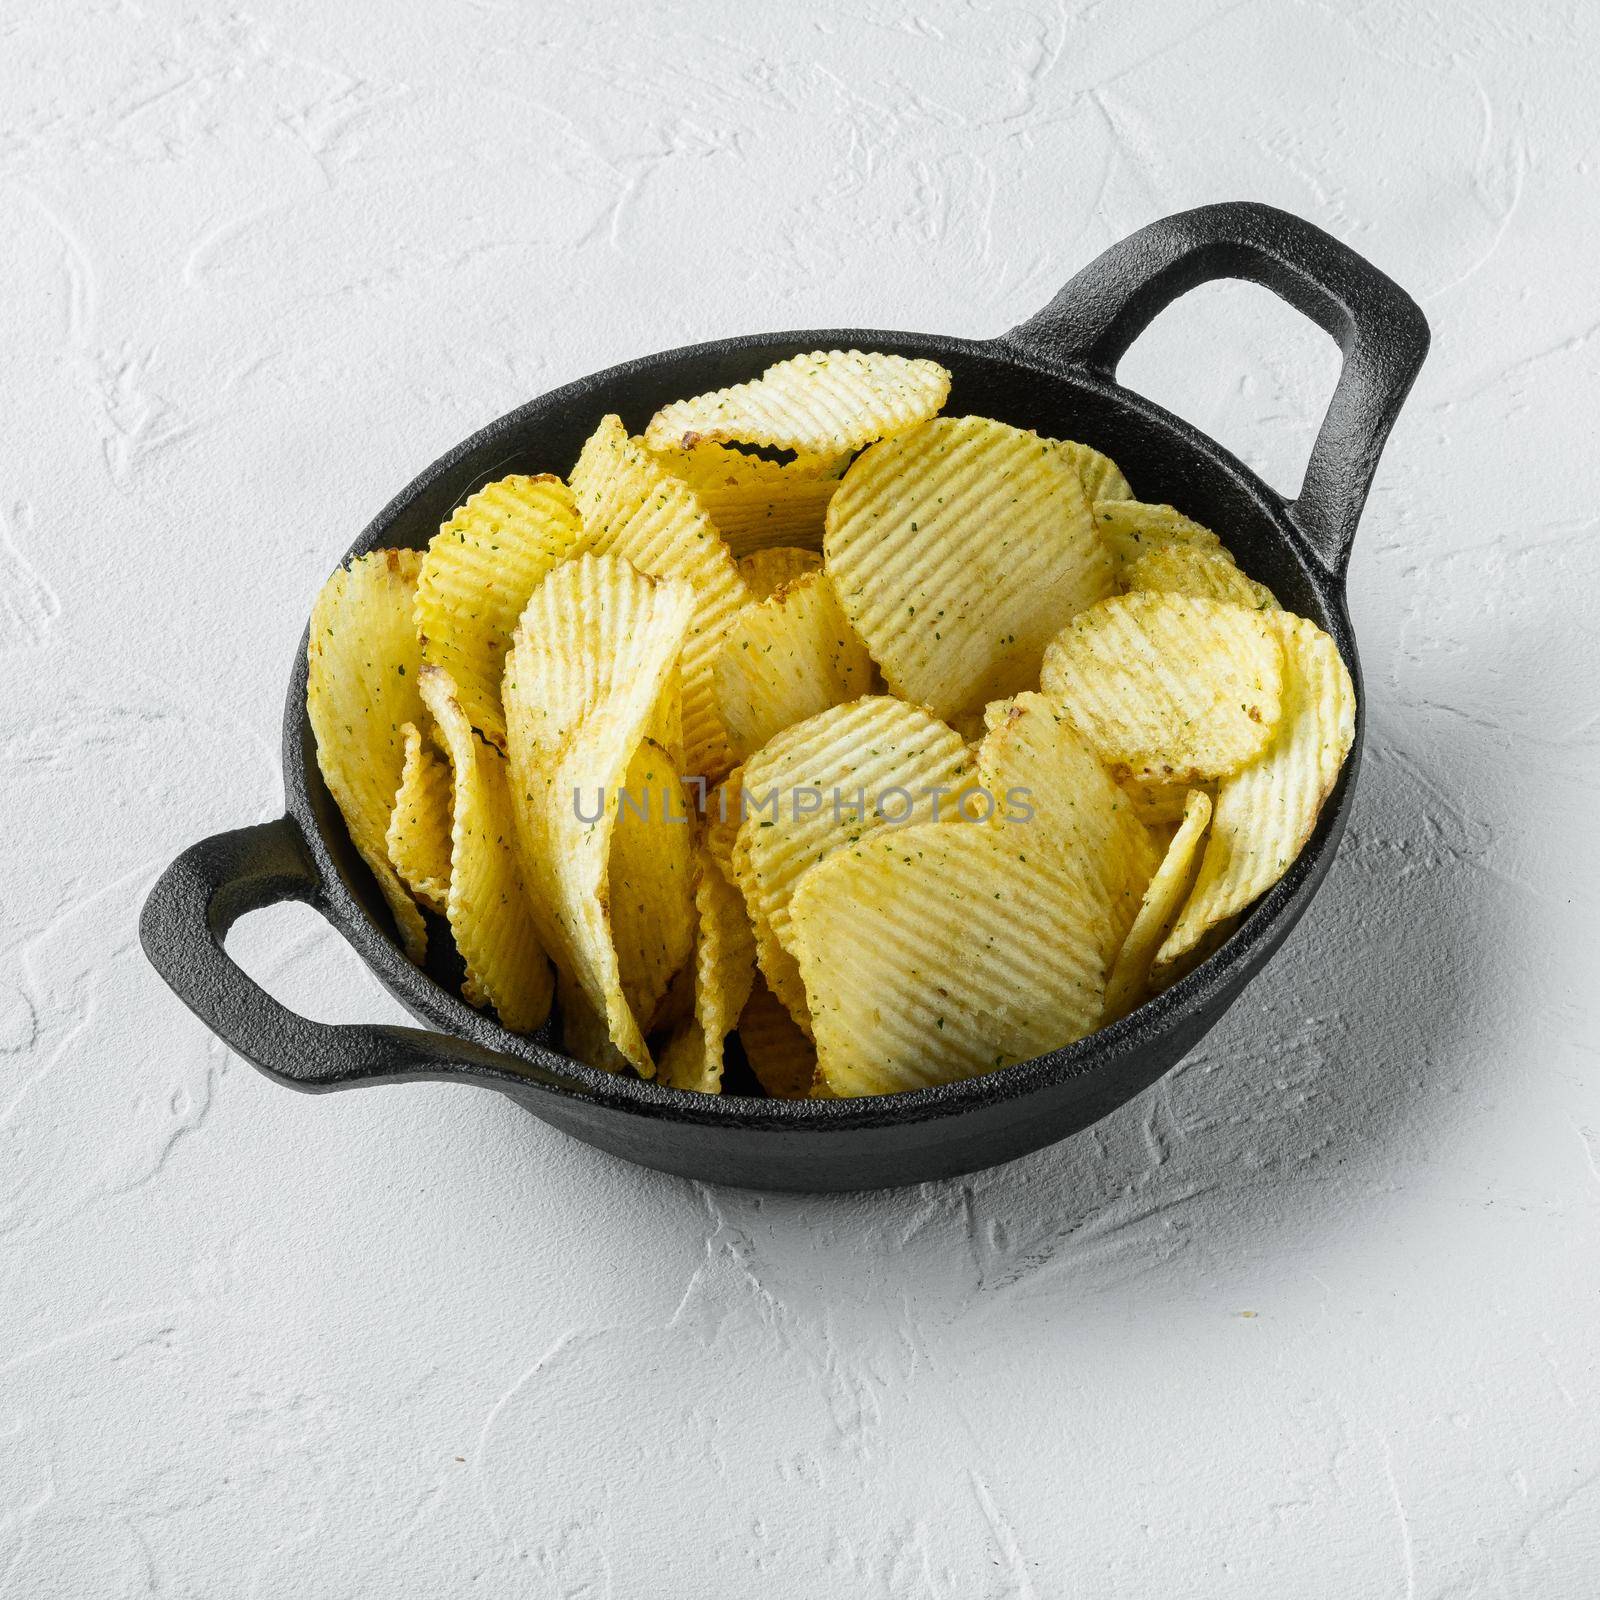 Crispy potato chips. Slices of potato, roasted with sea salt , in cast iron frying pan, on white stone surface, square format by Ilianesolenyi